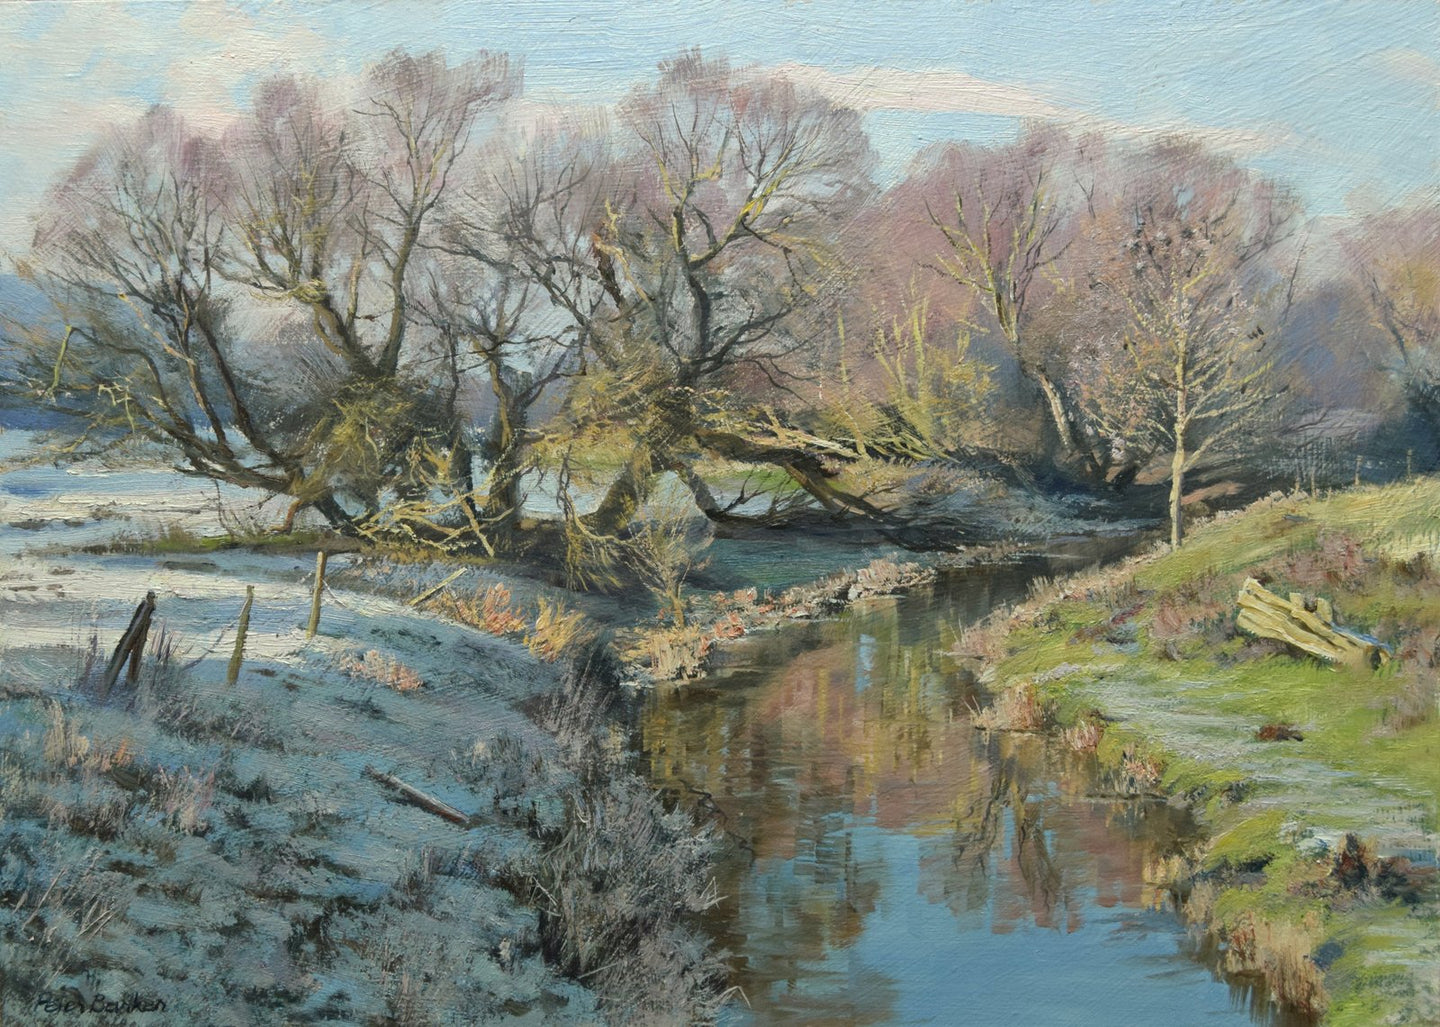 Crack Willows near Wakerley, by Peter Barker